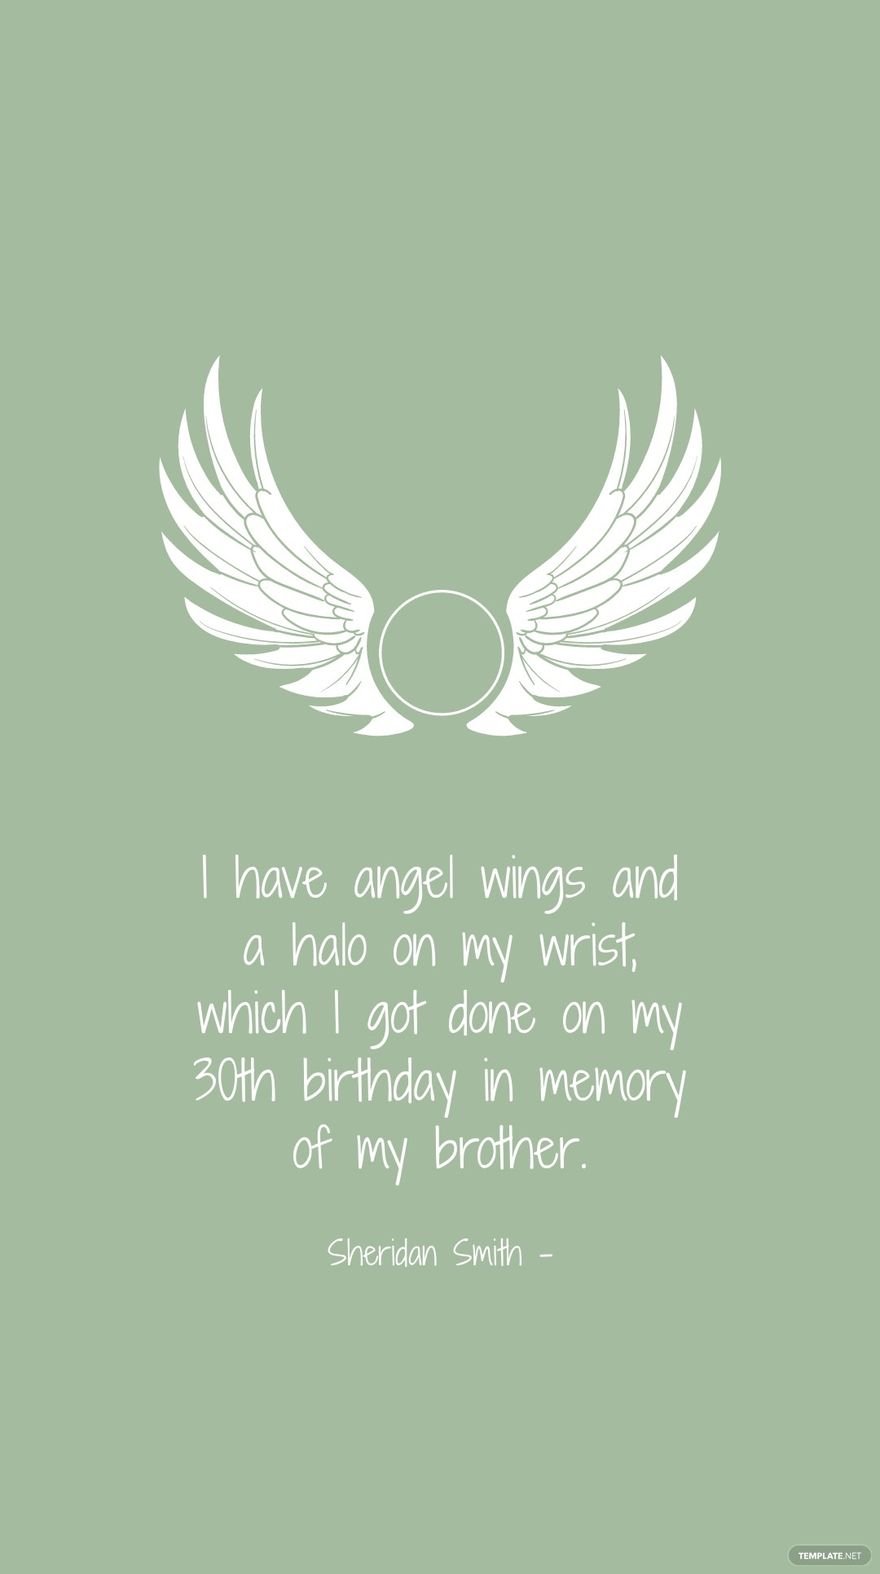 Sheridan Smith - I have angel wings and a halo on my wrist, which I got done on my 30th birthday in memory of my brother.